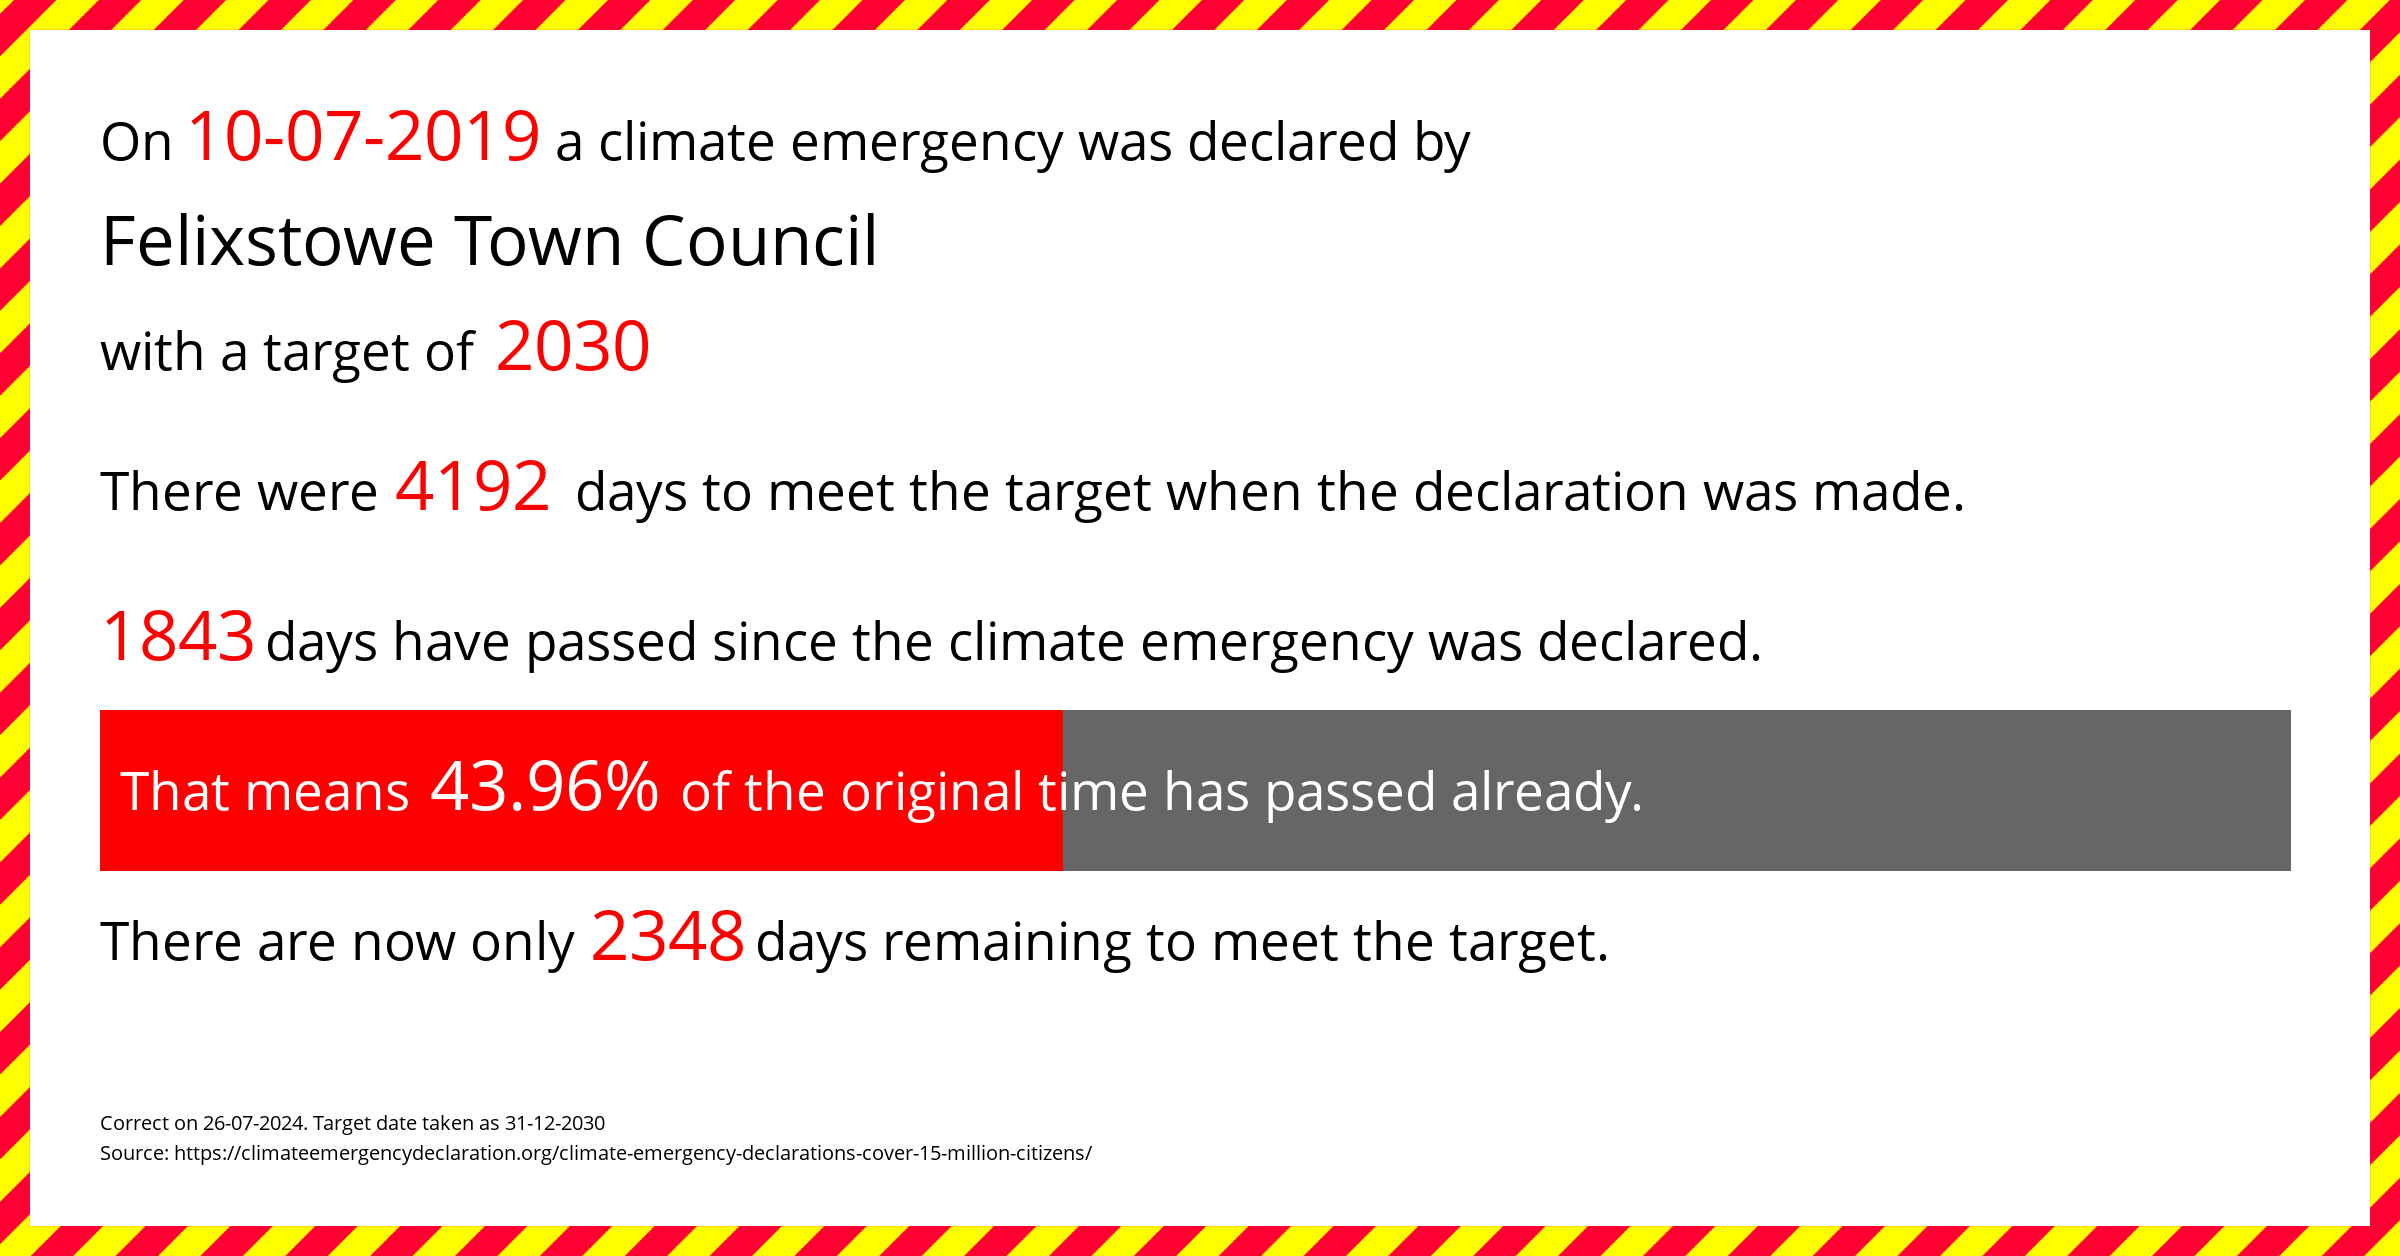 Felixstowe Town Council declared a Climate emergency on Wednesday 10th July 2019, with a target of 2030.